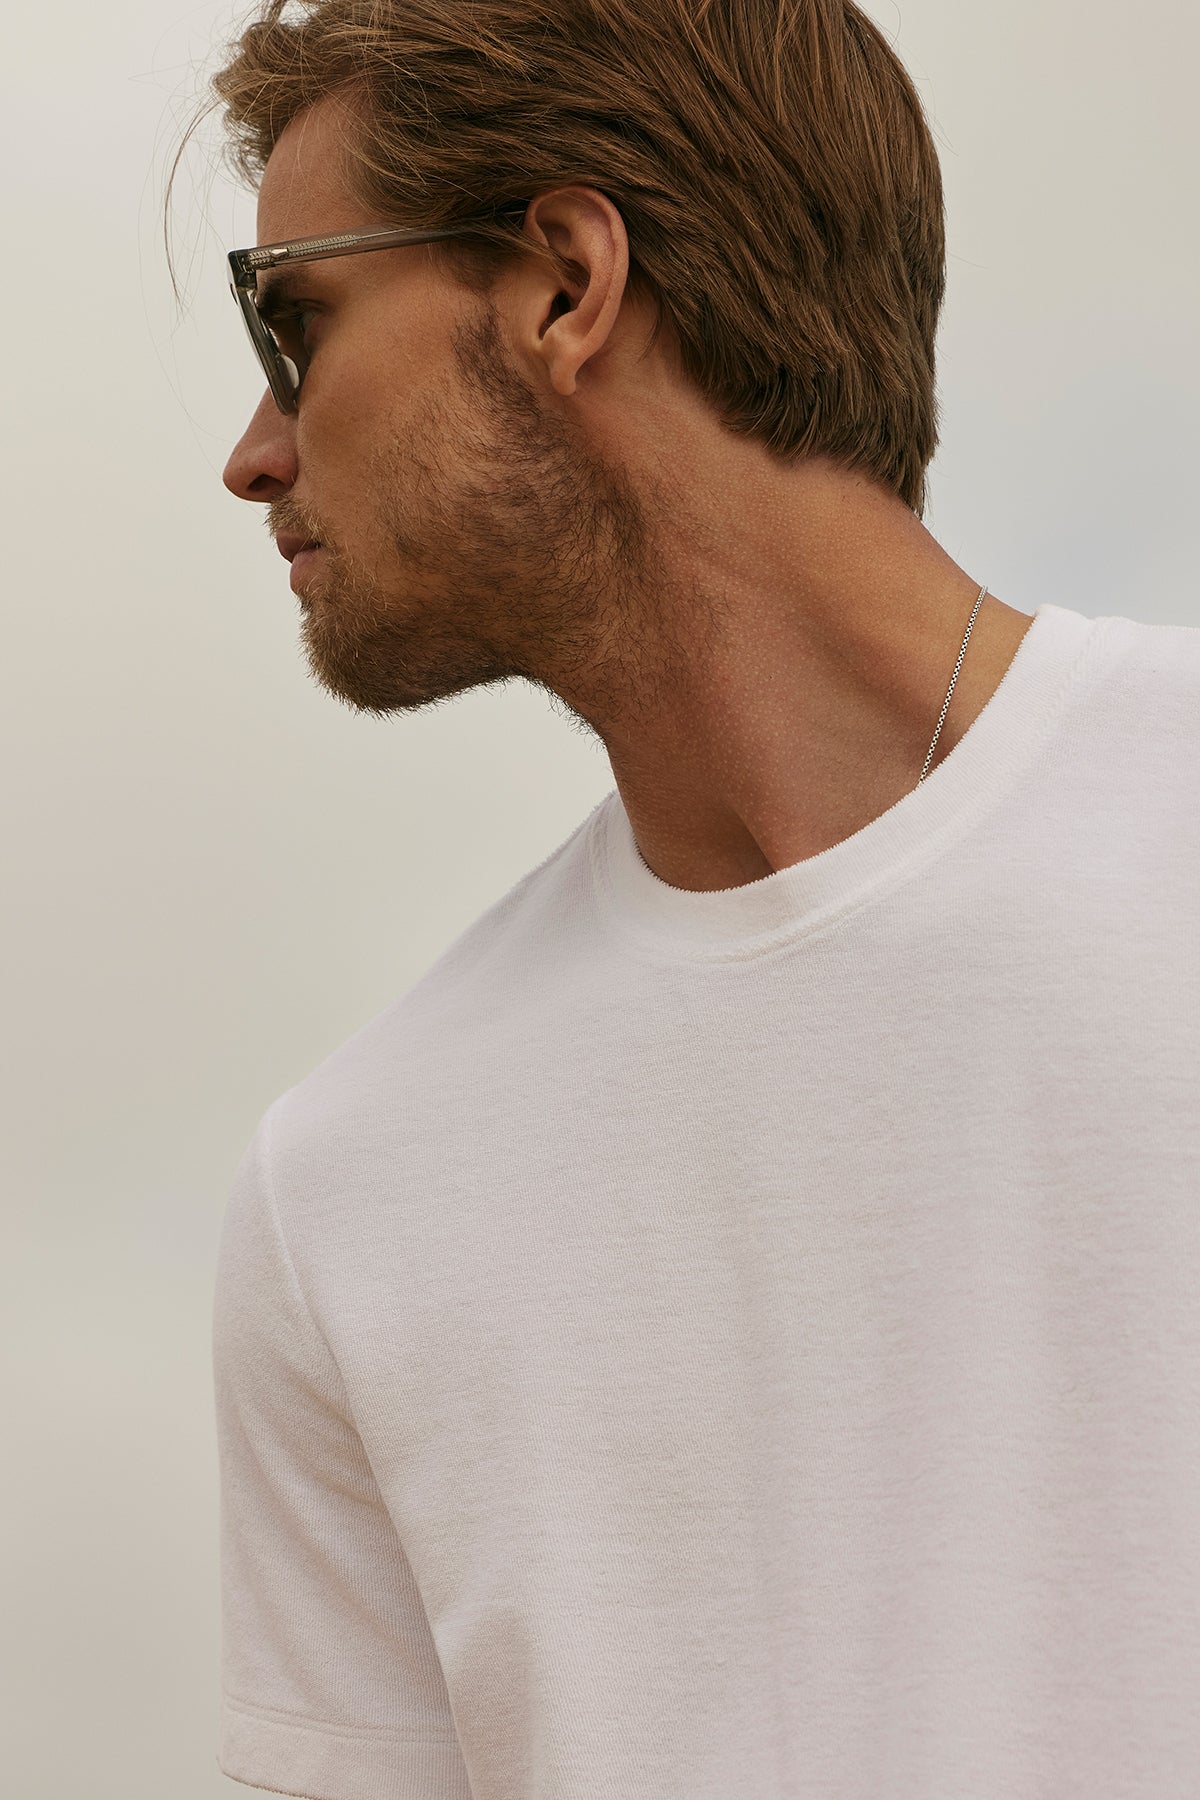 Profile view of a man with a light beard wearing sunglasses and a white cotton t-shirt with a crew neckline (JAXON CREW), looking to the left against a soft gray background.-36891079508161